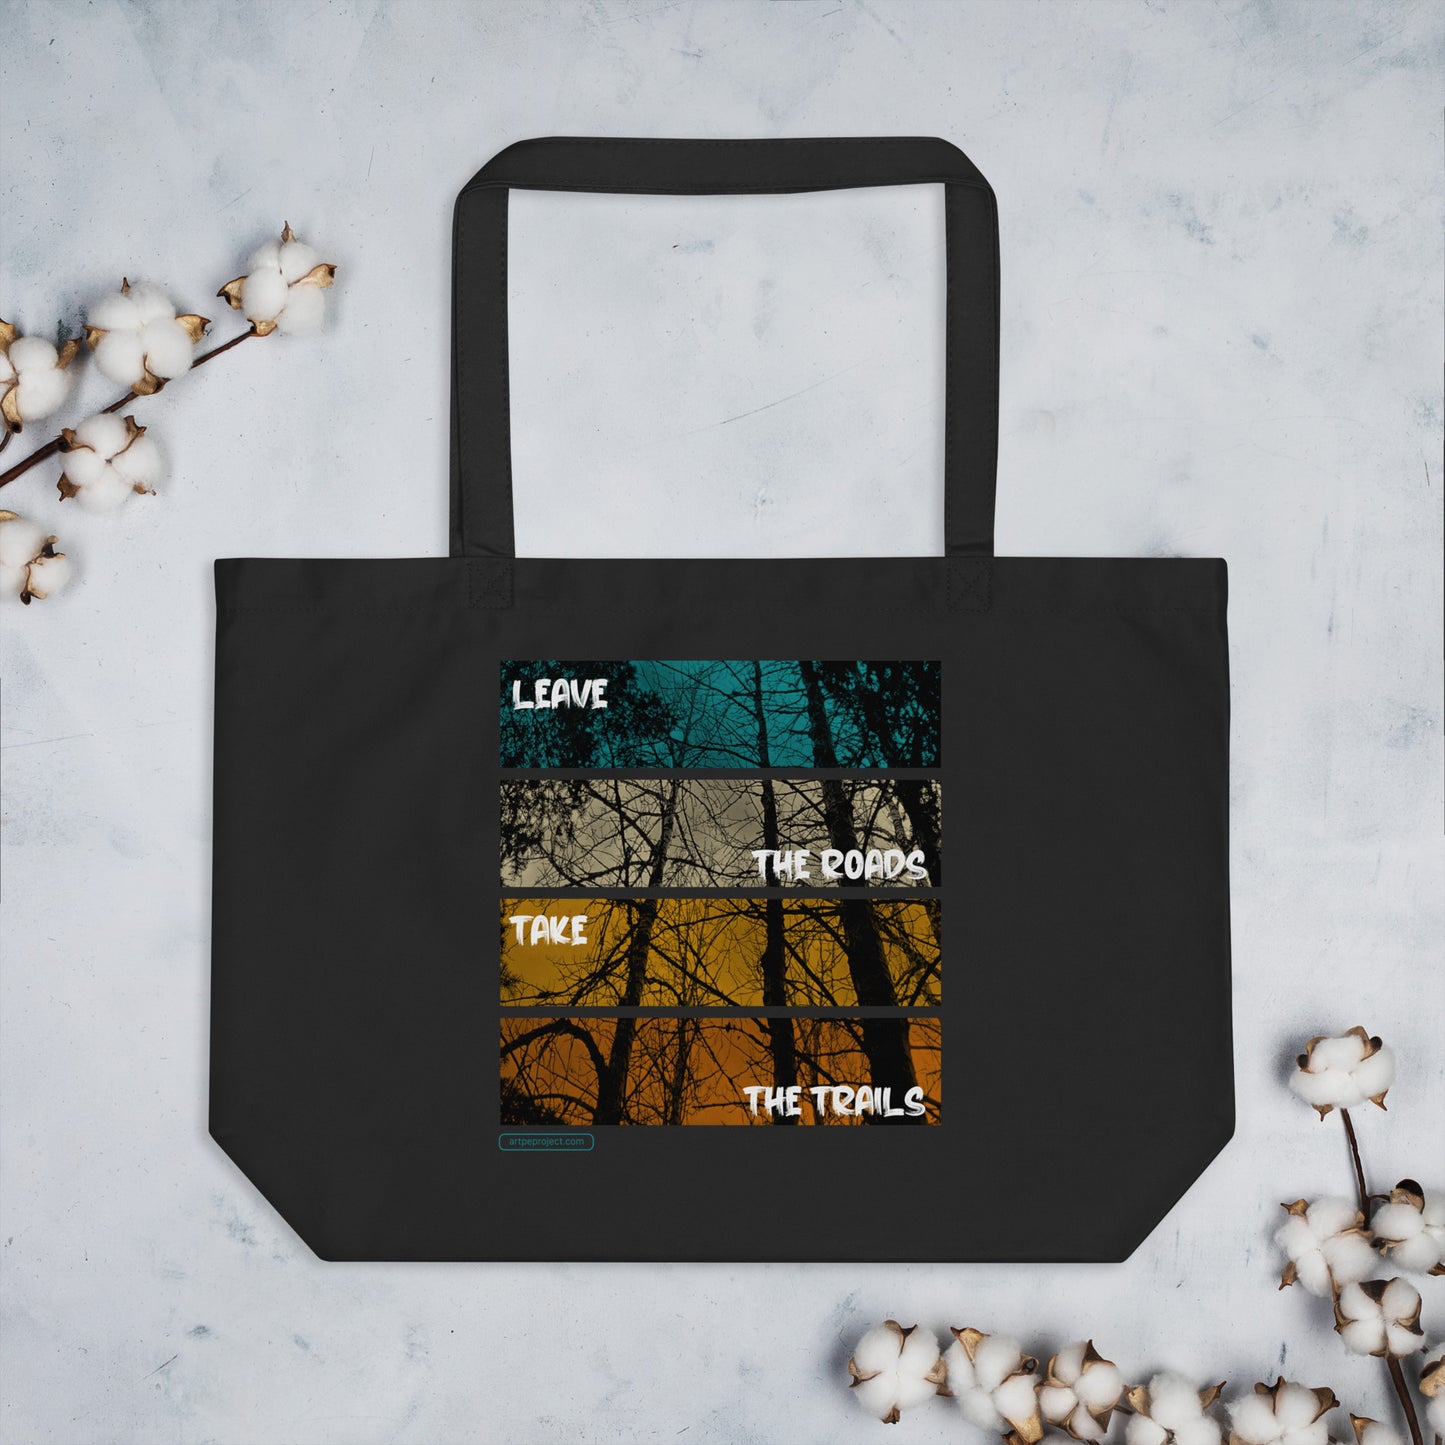 Leave the Roads, Take the Trails - Large ECO Tote Bag